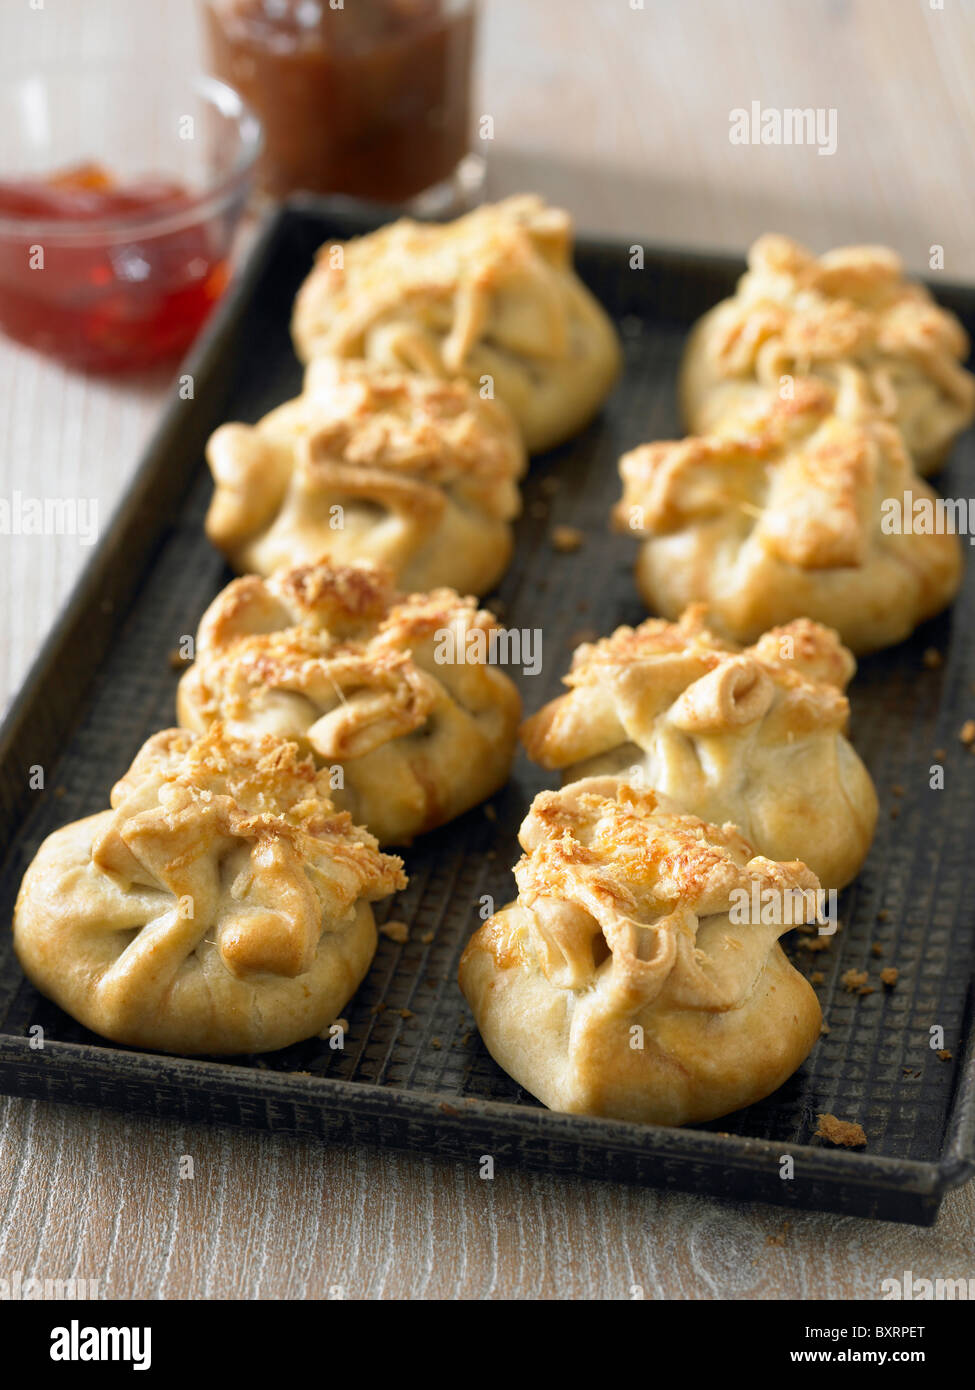 Puff pastry parcels Stock Photo